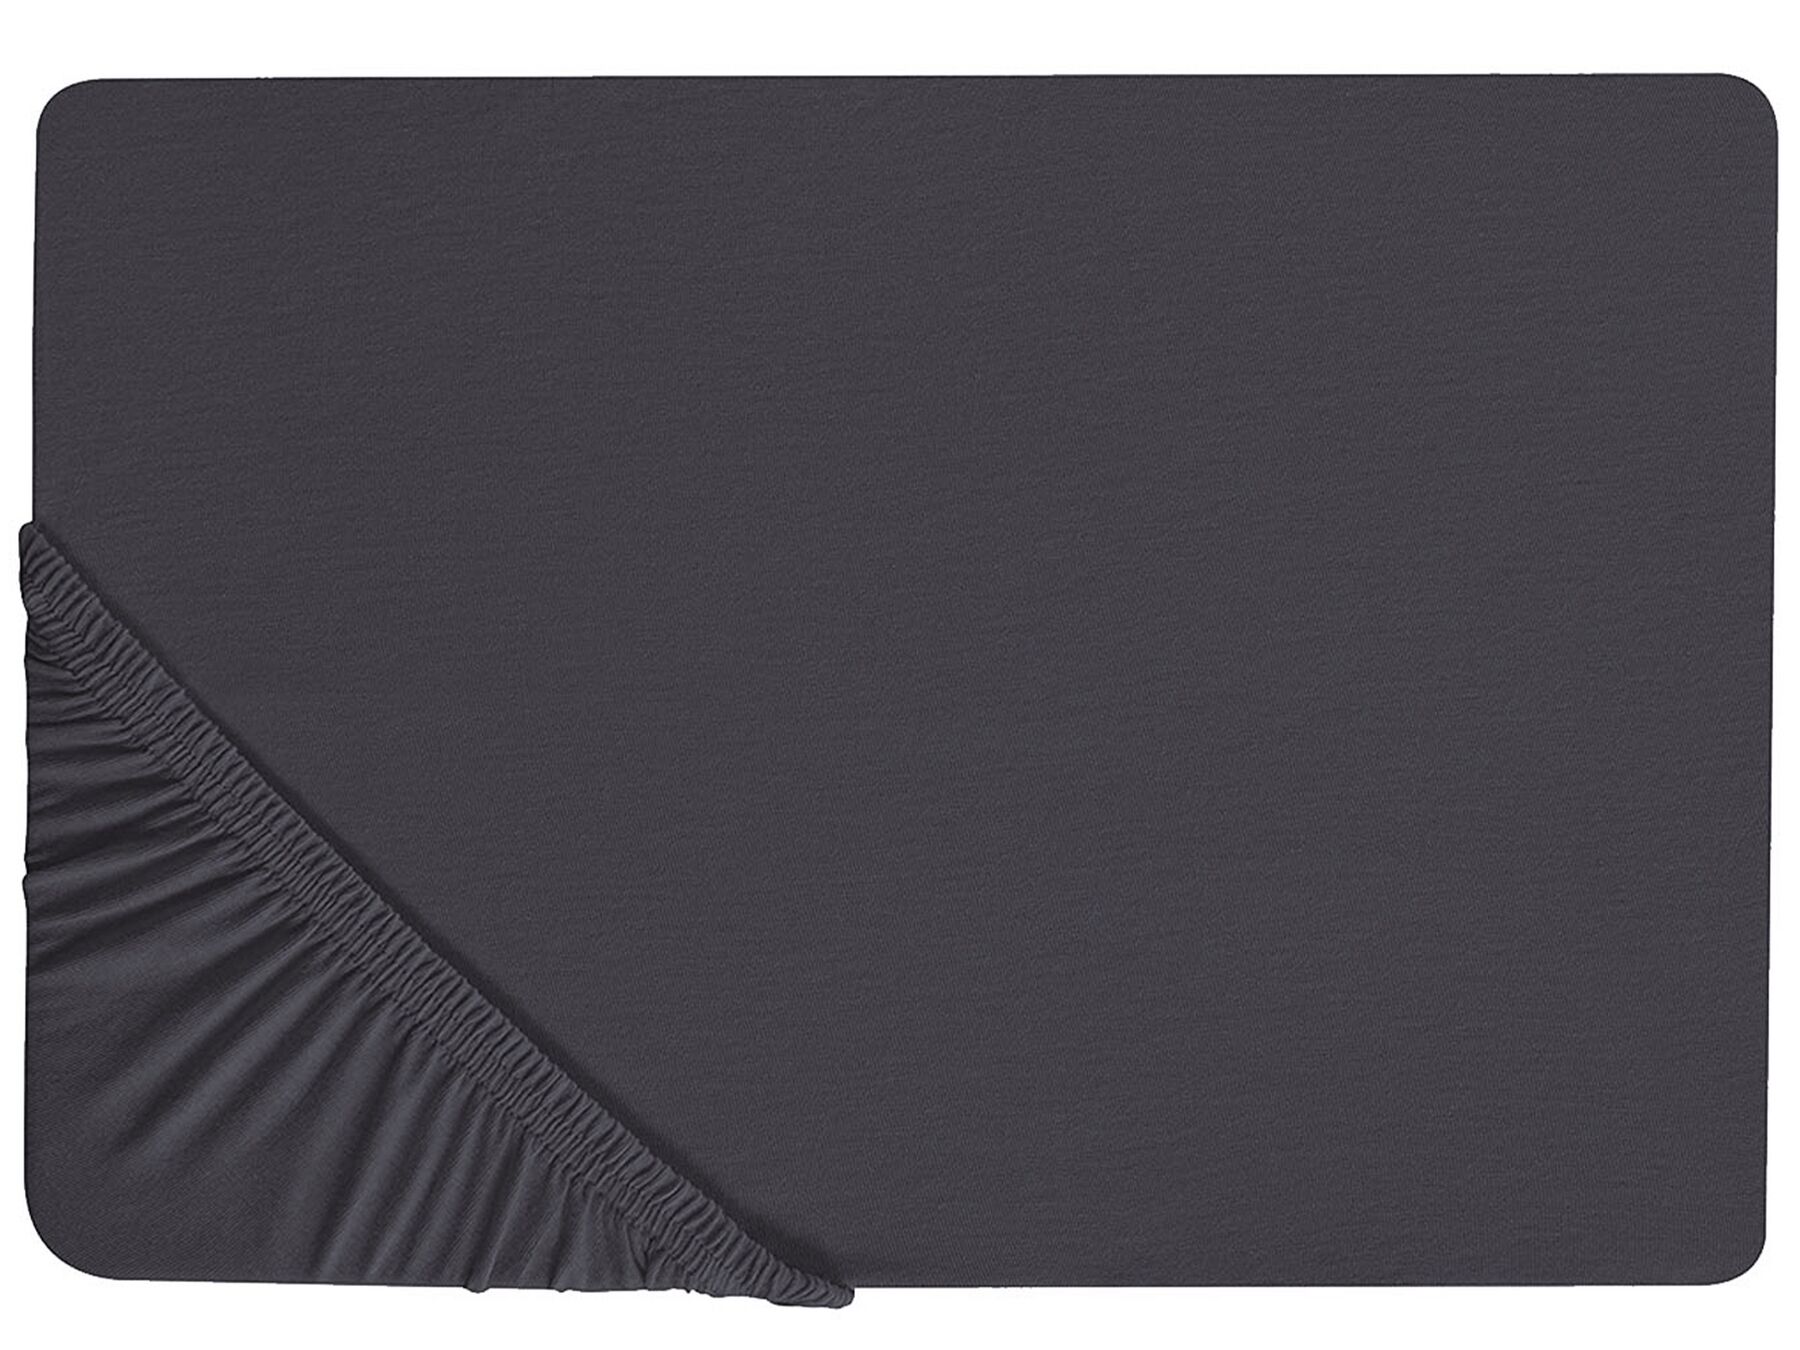 Cotton Fitted Sheet 180 x 200 cm Black HOFUF_815934